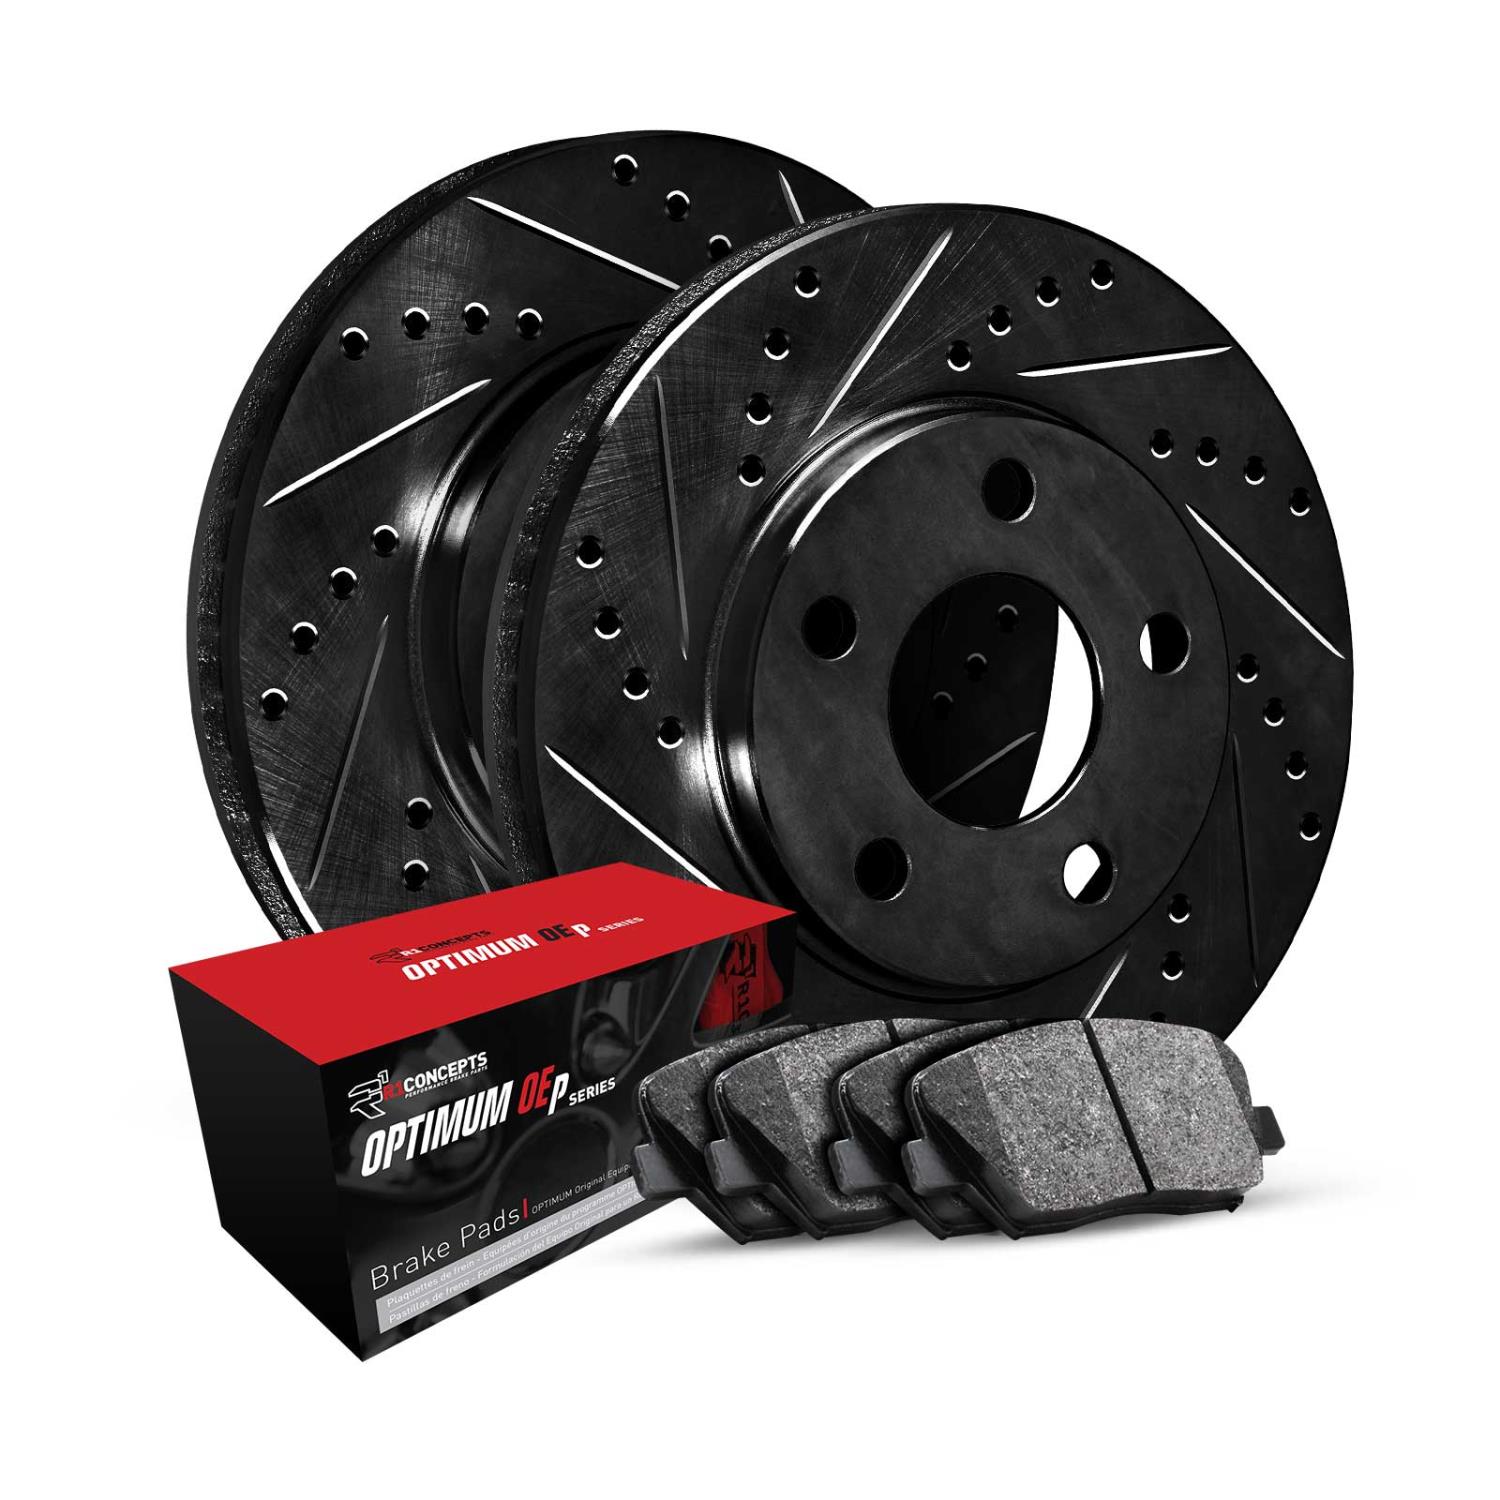 E-Line Drilled & Slotted Black Brake Rotor Set w/Optimum OE Pads, Fits Select Acura/Honda, Position: Rear